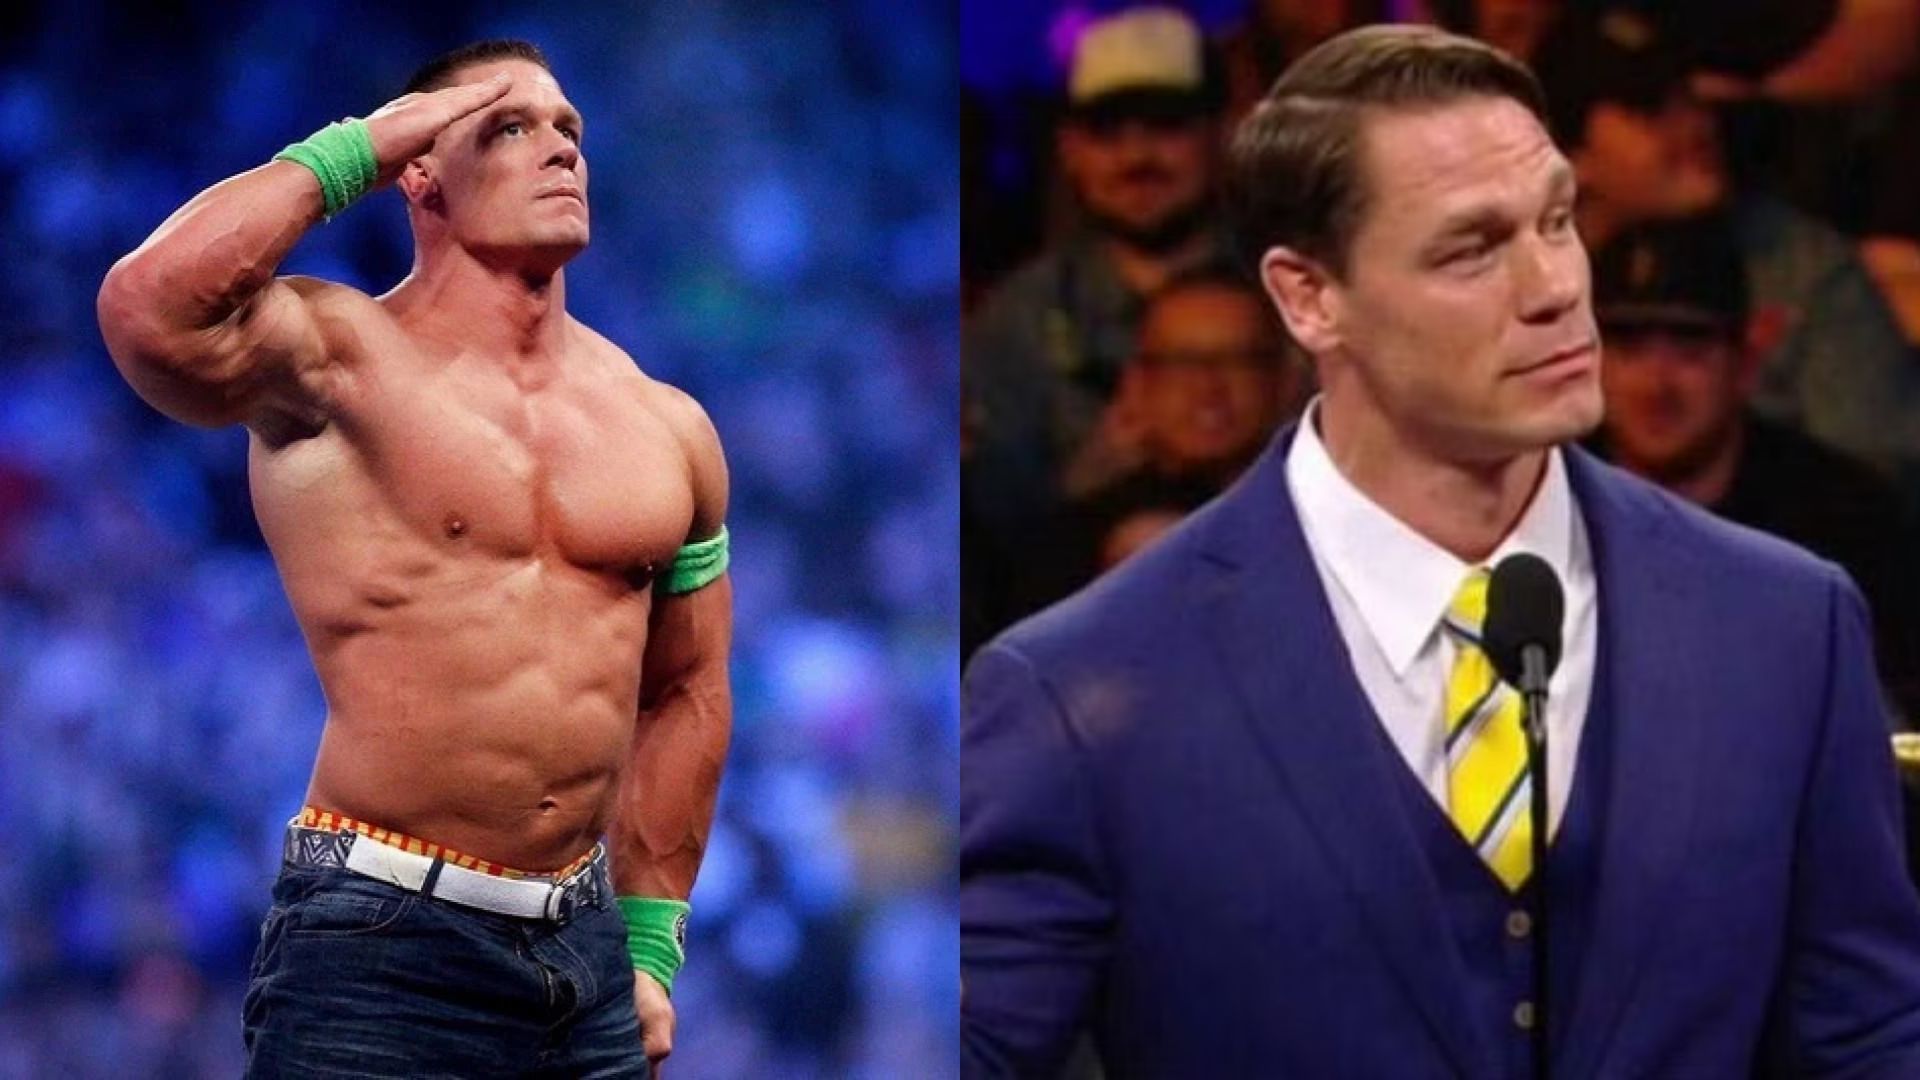 John Cena has achieved much, but not everything